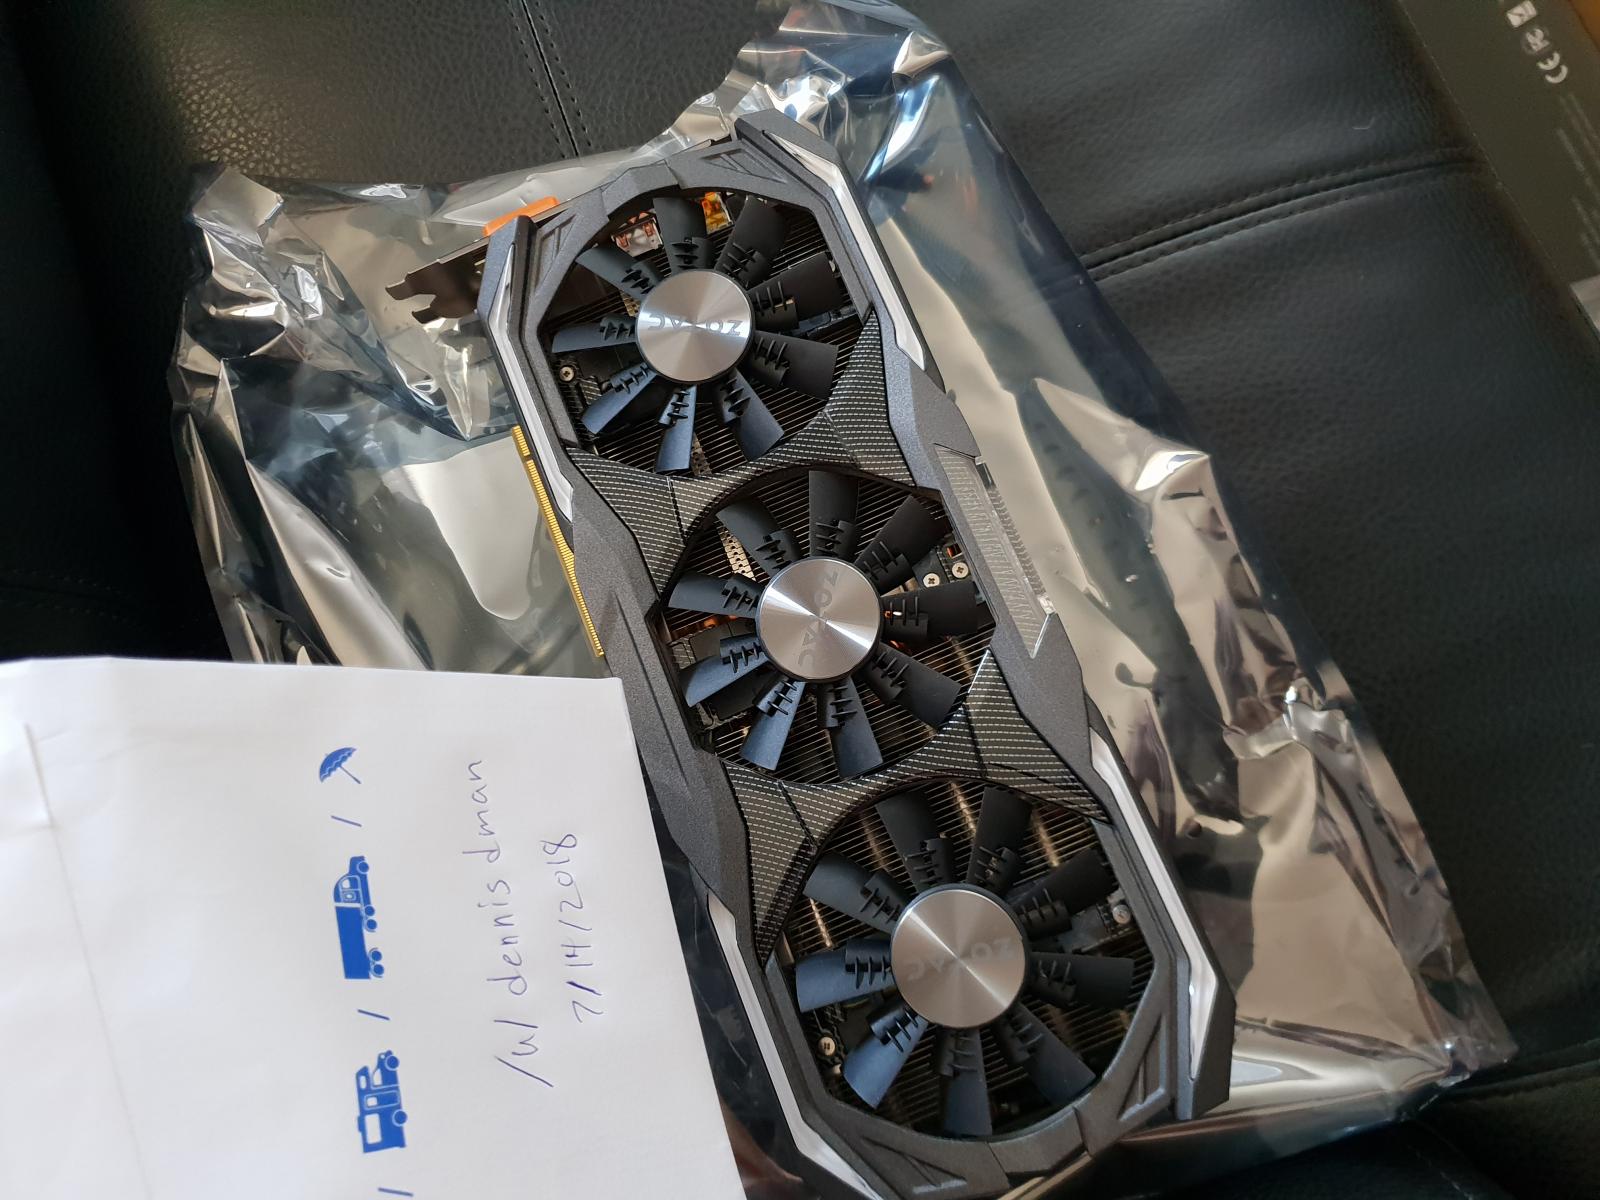 For sale Zotac 1070 AMP! Extreme